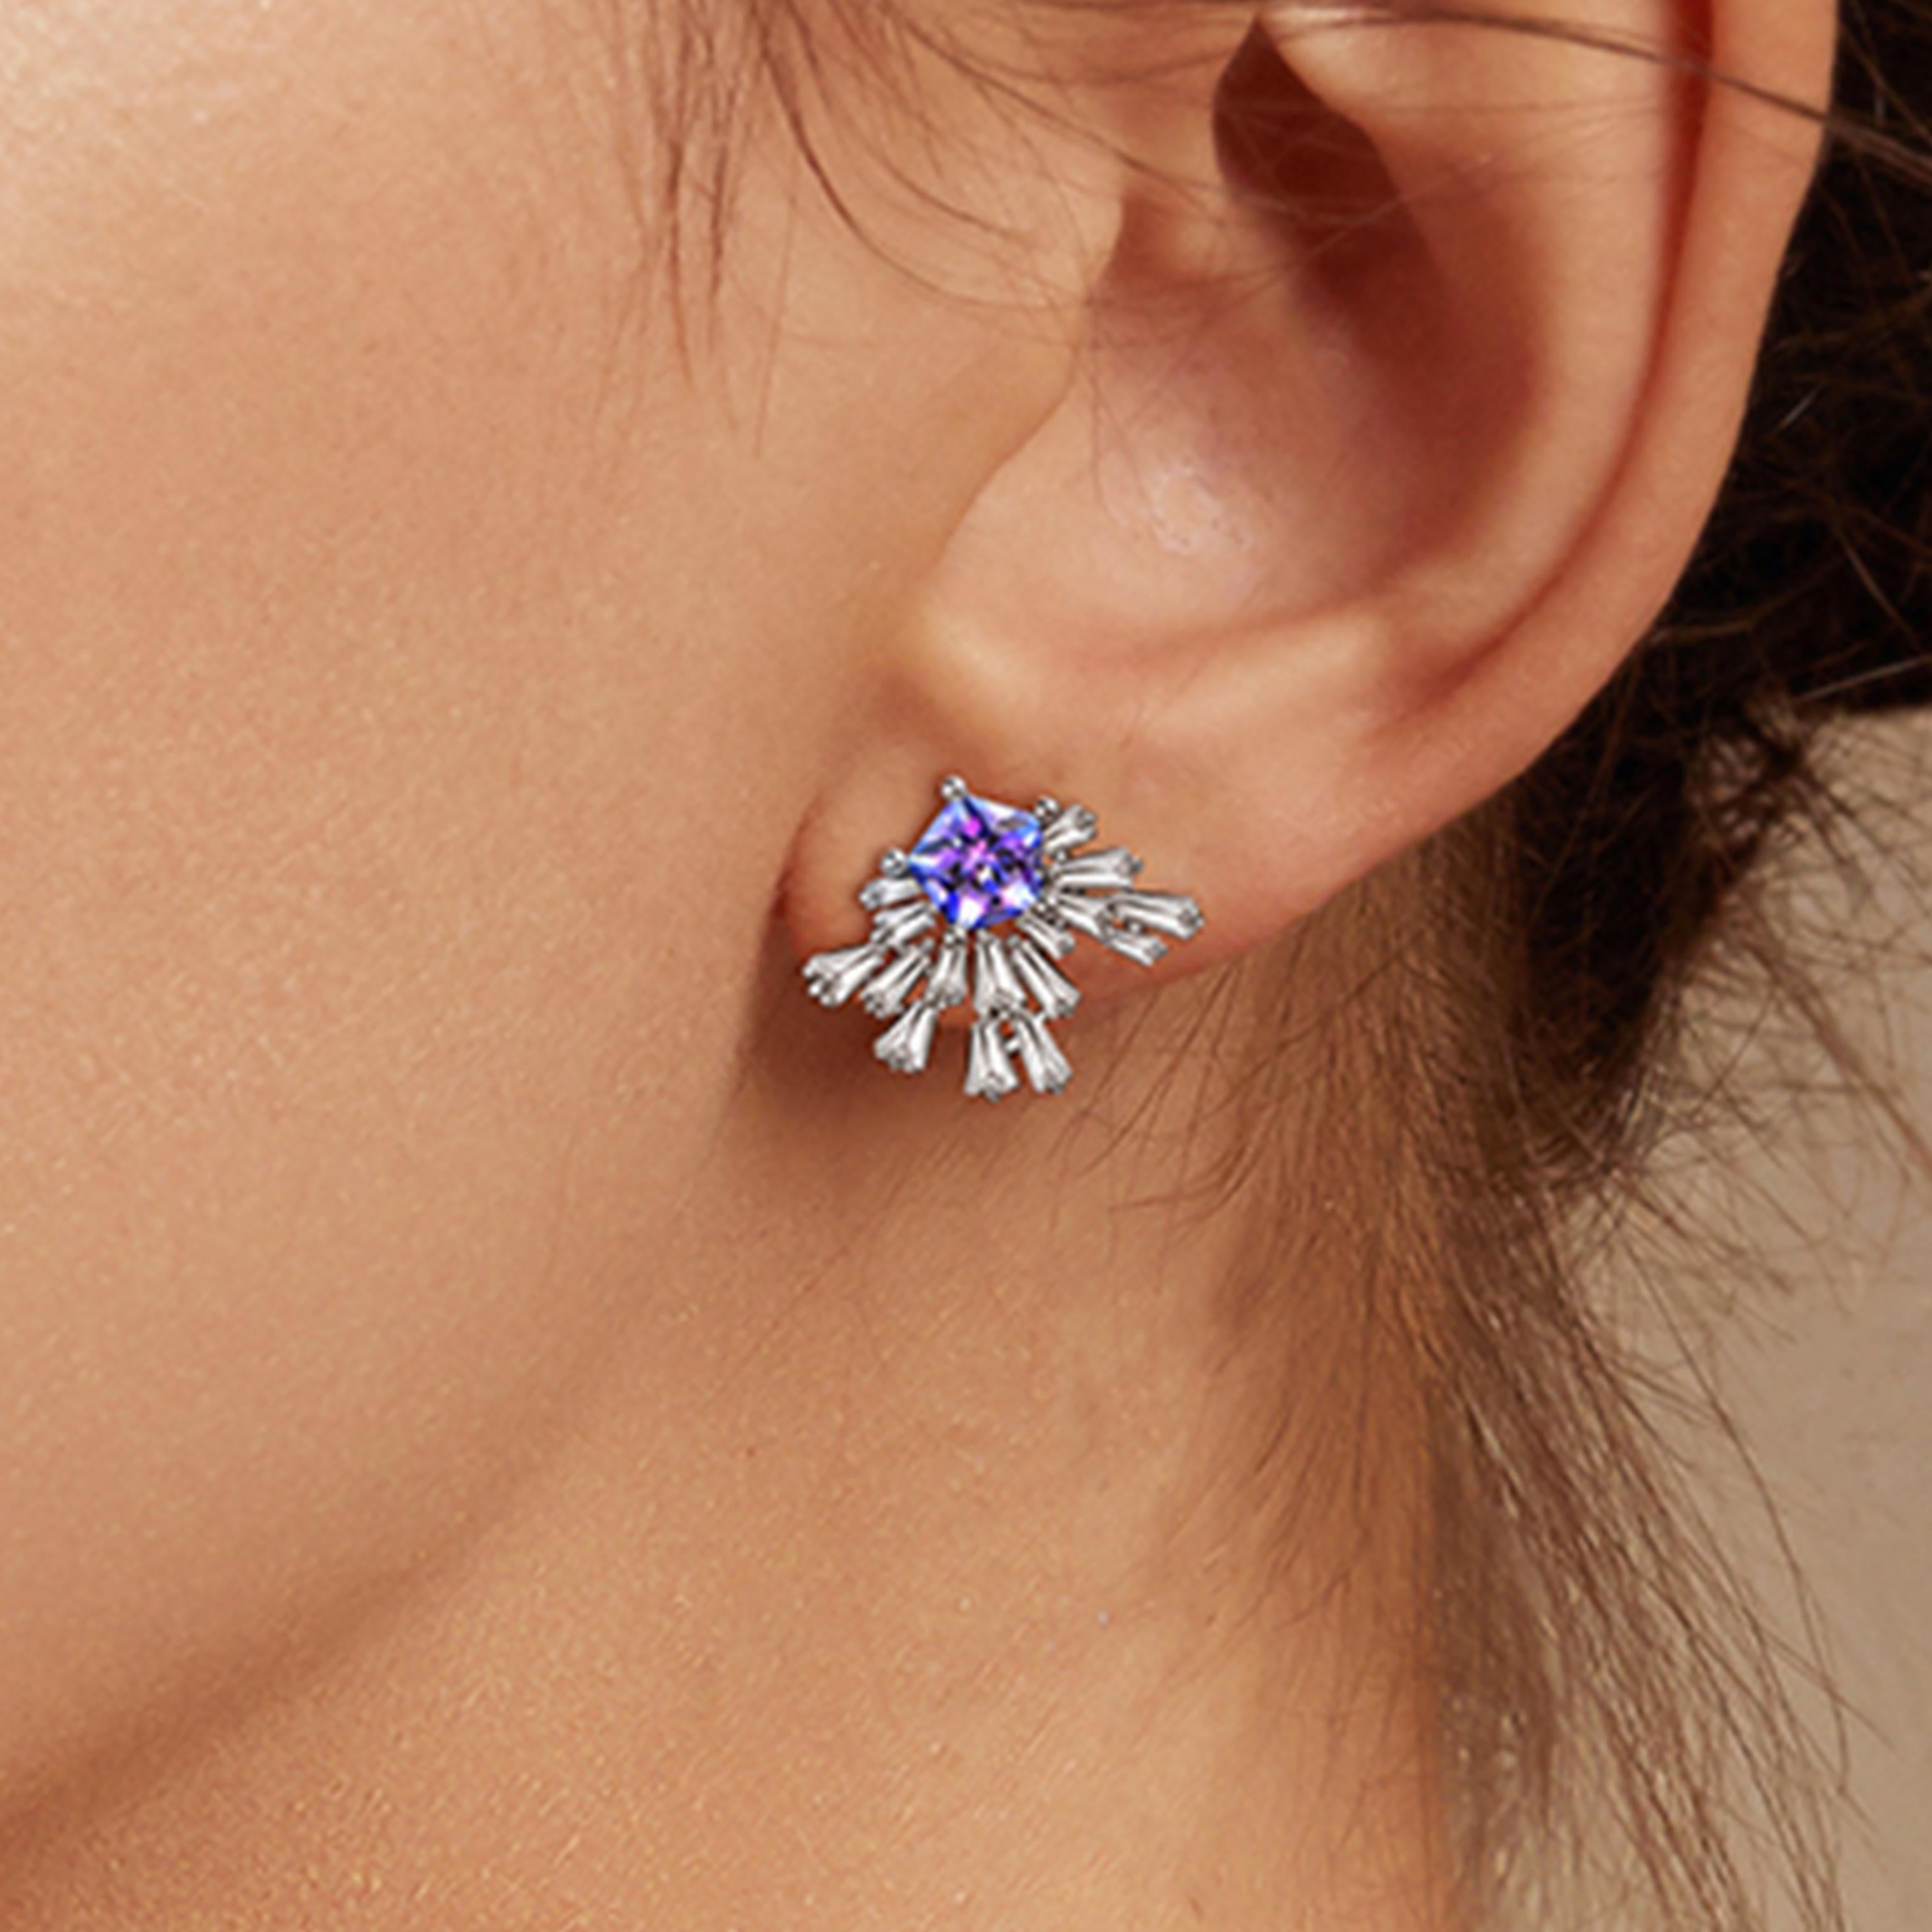 Description:
Light up the room with the new Carpe Diem Collection by Fei Liu! Carpe Diem ‘Fountain’ stud earrings with Swarovski Purple-Aqua Pentagon Star cubic zirconia and 8 hearts and 8 arrows CZ, set in white rhodium plate on sterling